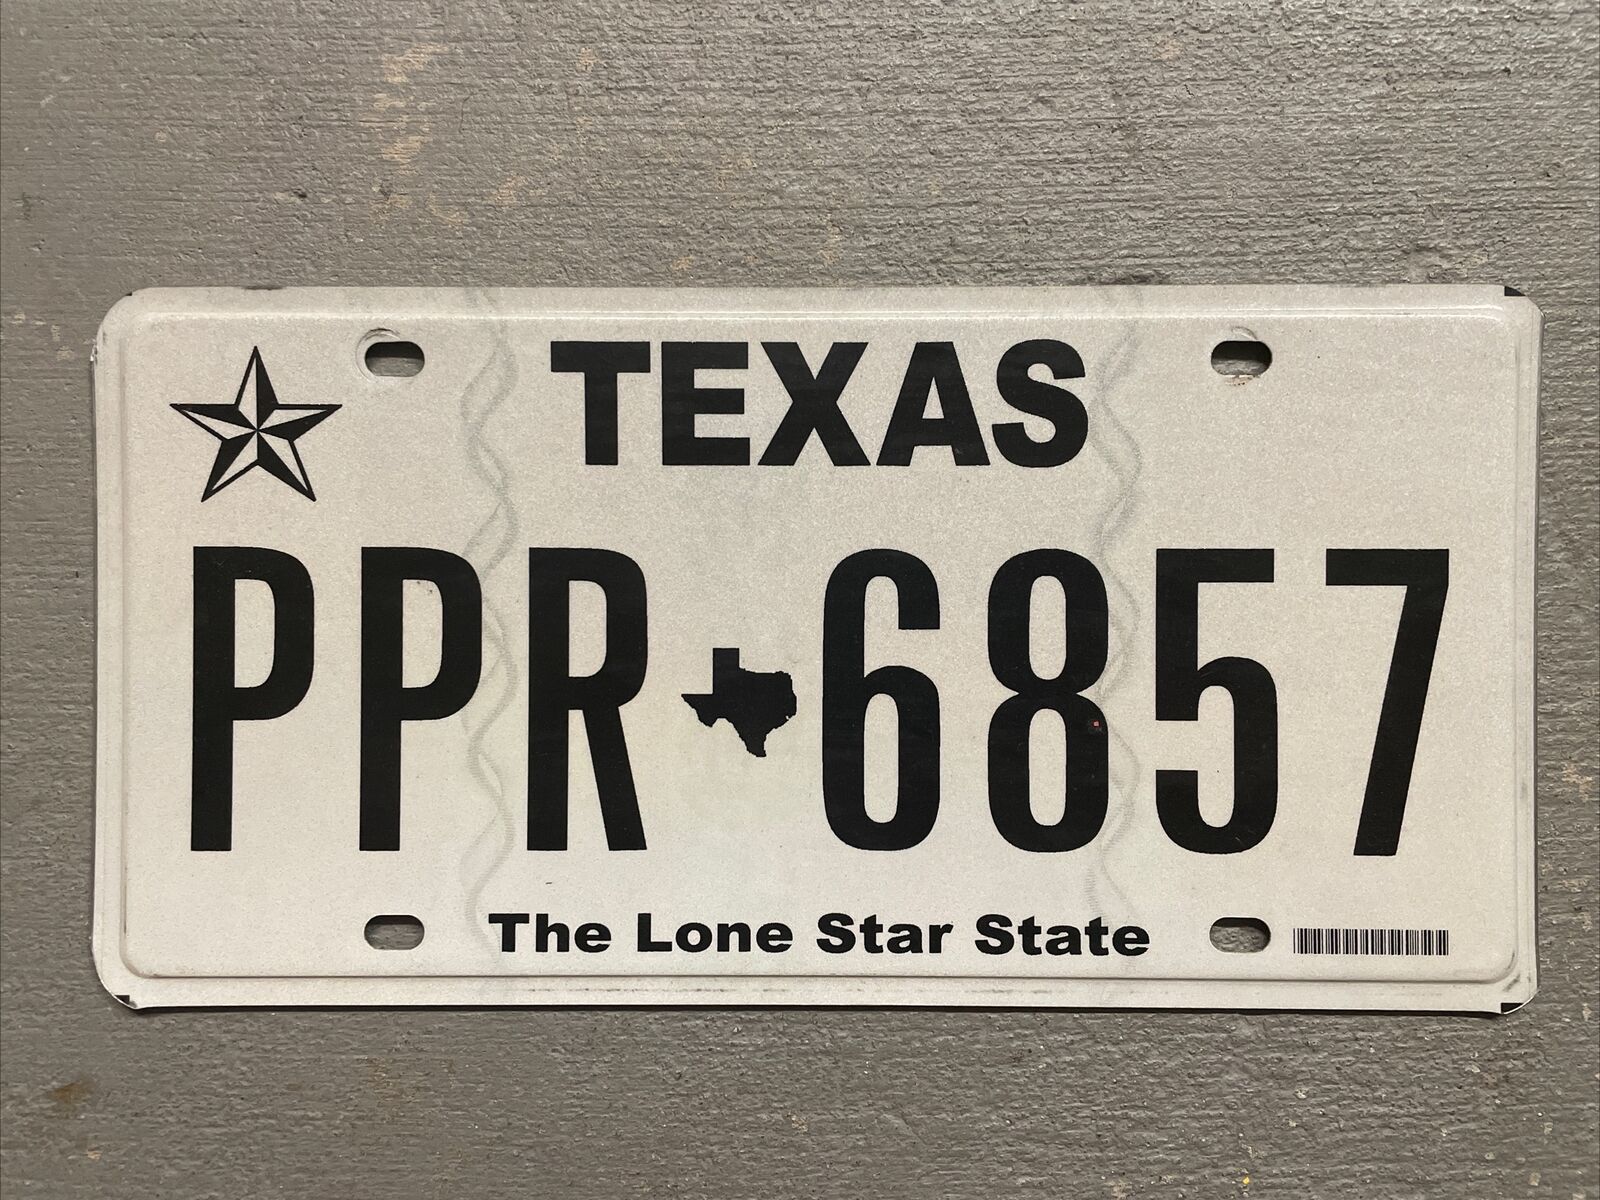 EXPIRED TEXAS LICENSE PLATE THE LONE STAR STATE RANDOM LETTERS- NUMBERS NICE